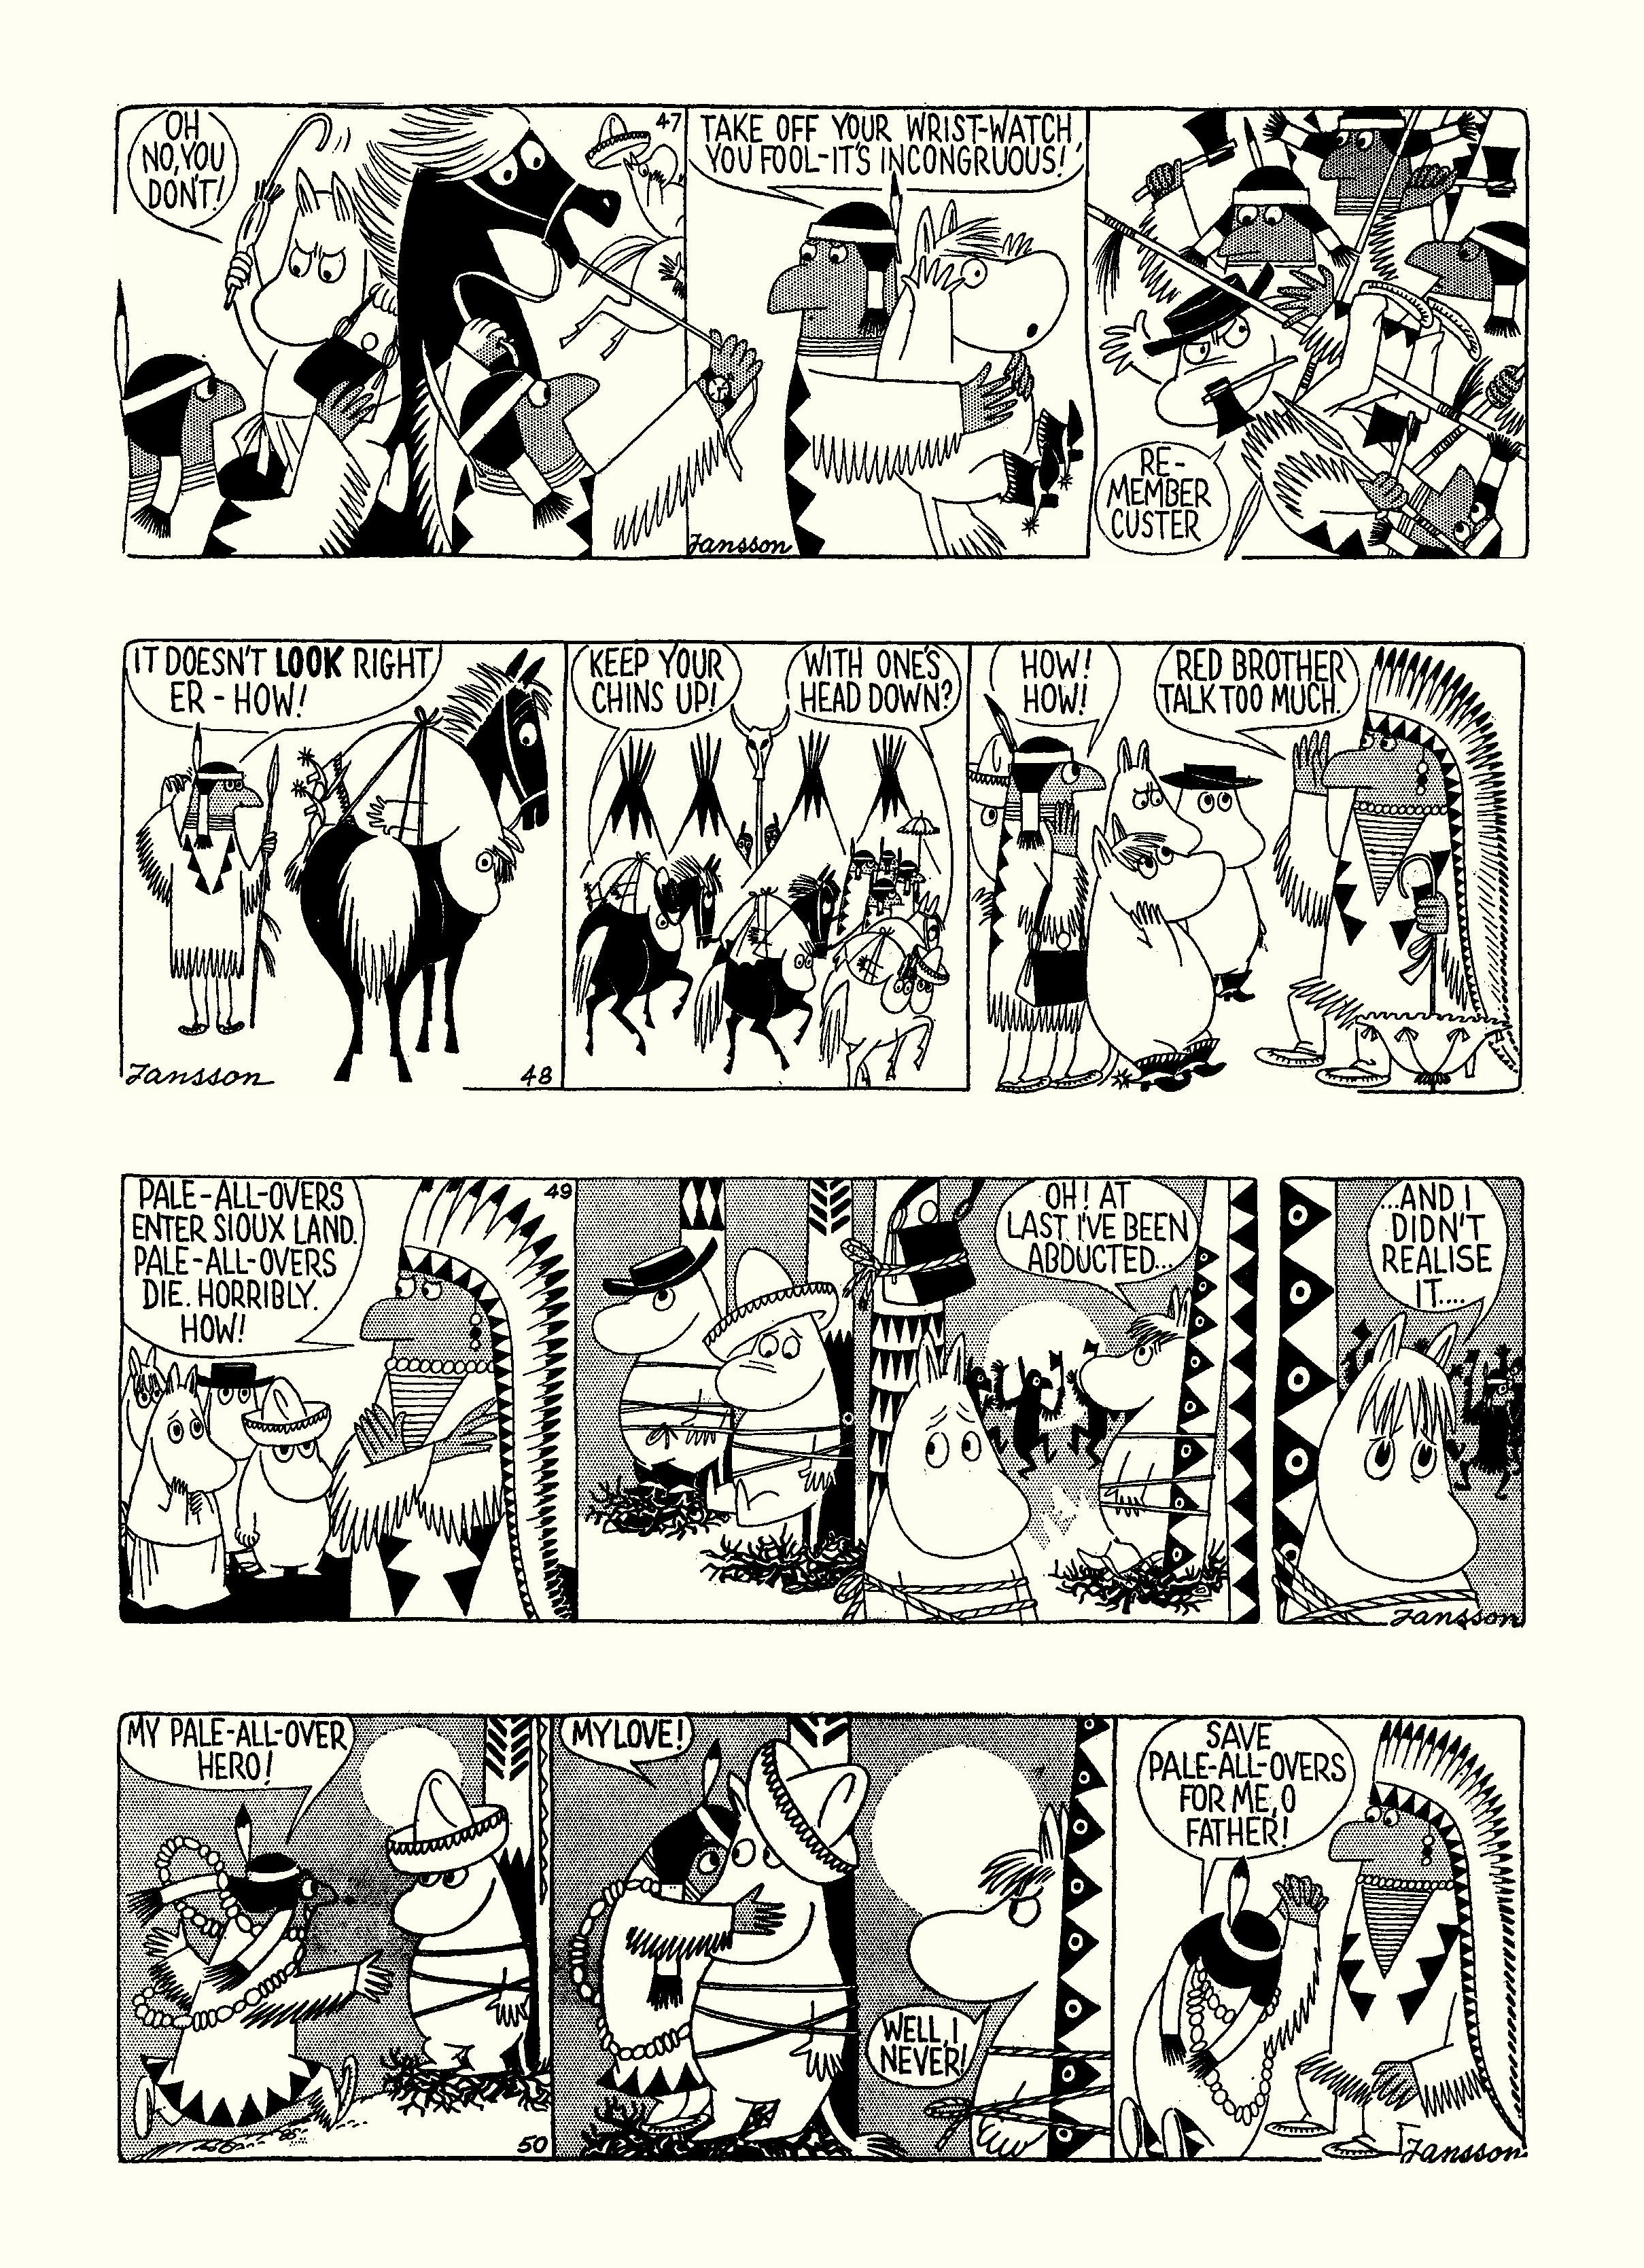 Read online Moomin: The Complete Tove Jansson Comic Strip comic -  Issue # TPB 4 - 18